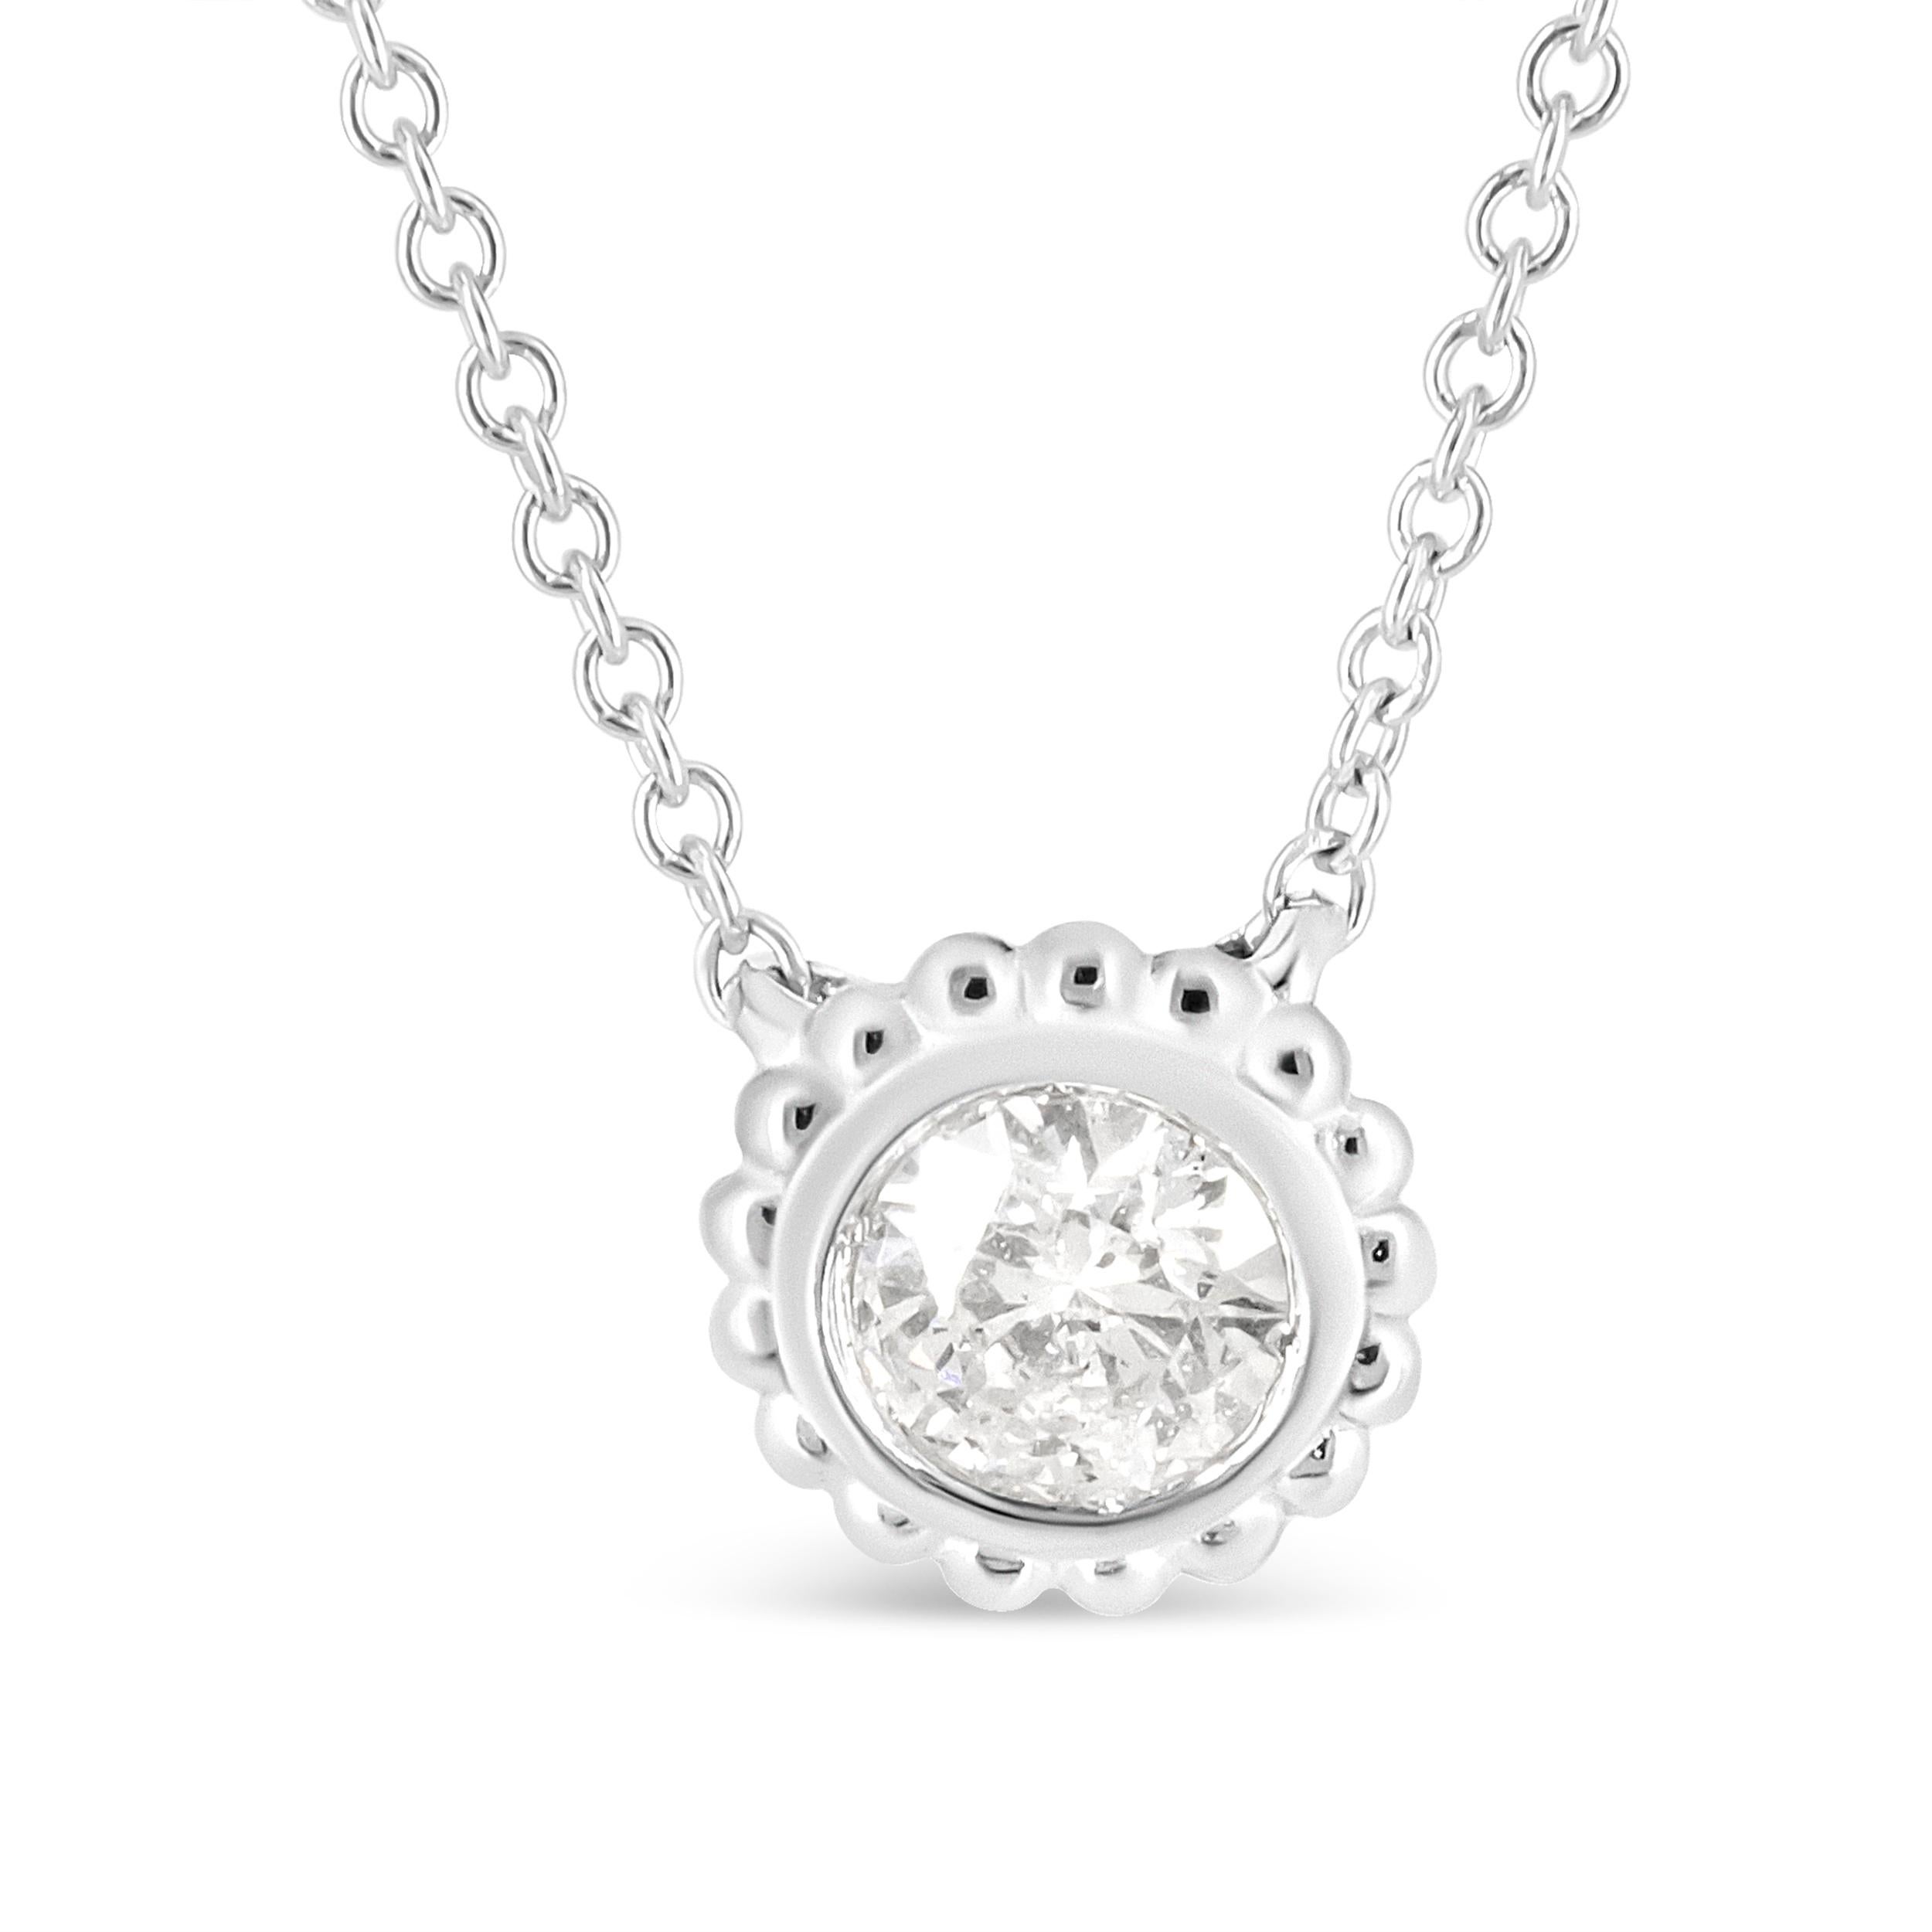 Count on this striking piece to stand out in a sea of diamond pendant necklaces. Unlike the typical design, the cable chain is cinched to one 1/2 cttw natural round diamond that’s fixed in a bezel setting and surrounded by 10K white gold details,